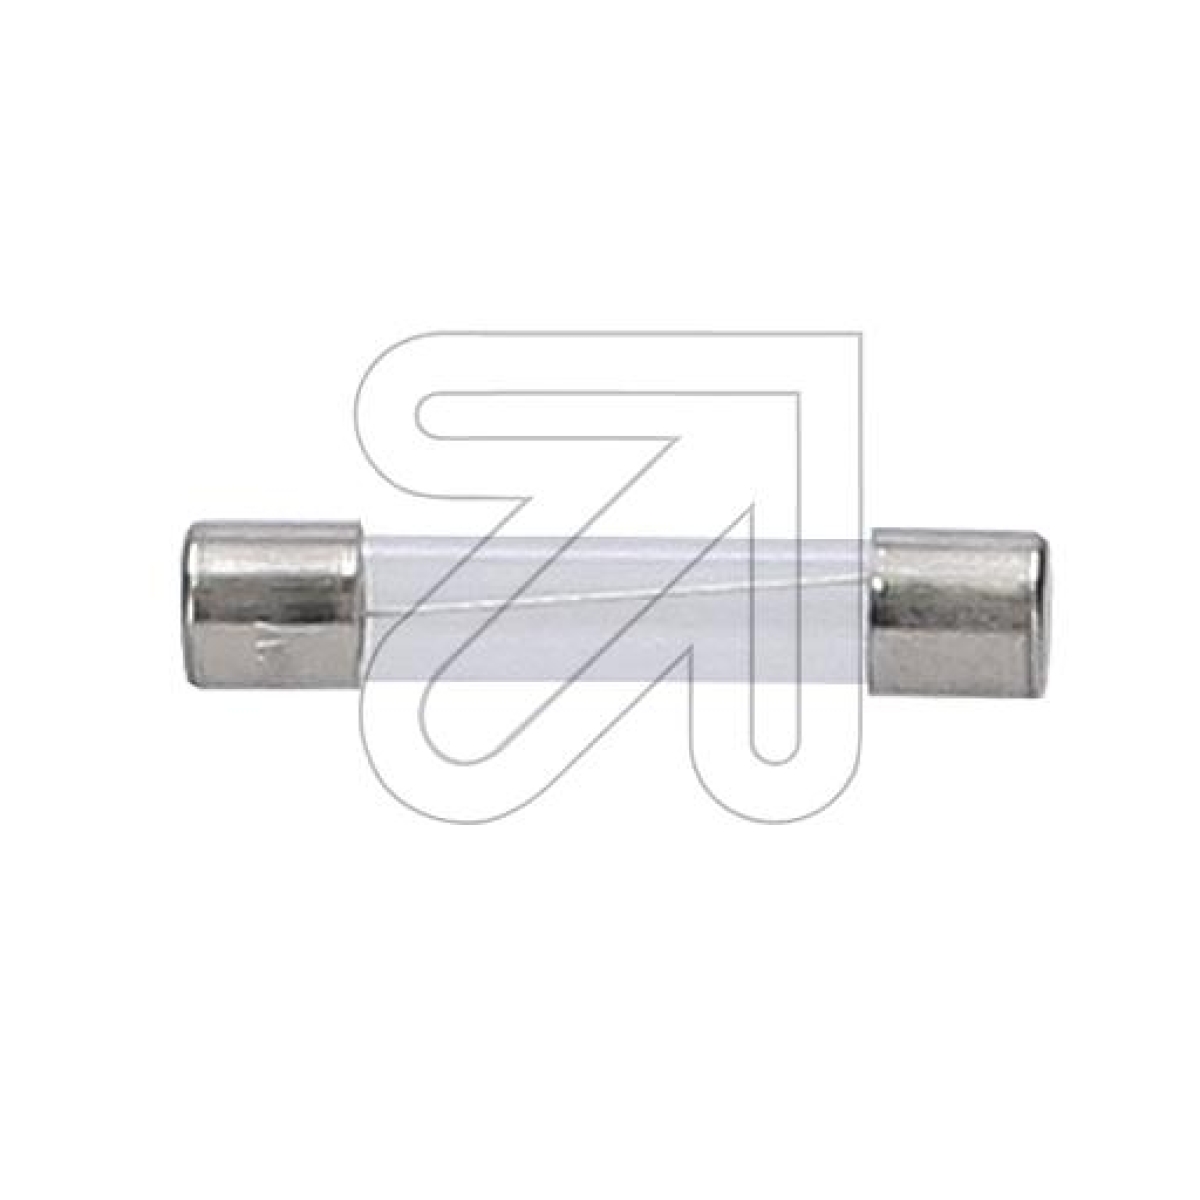 ELUFine-acting fuse, slow-acting 6.3x32 10.0A-Price for 10 pcs.Article-No: 187150